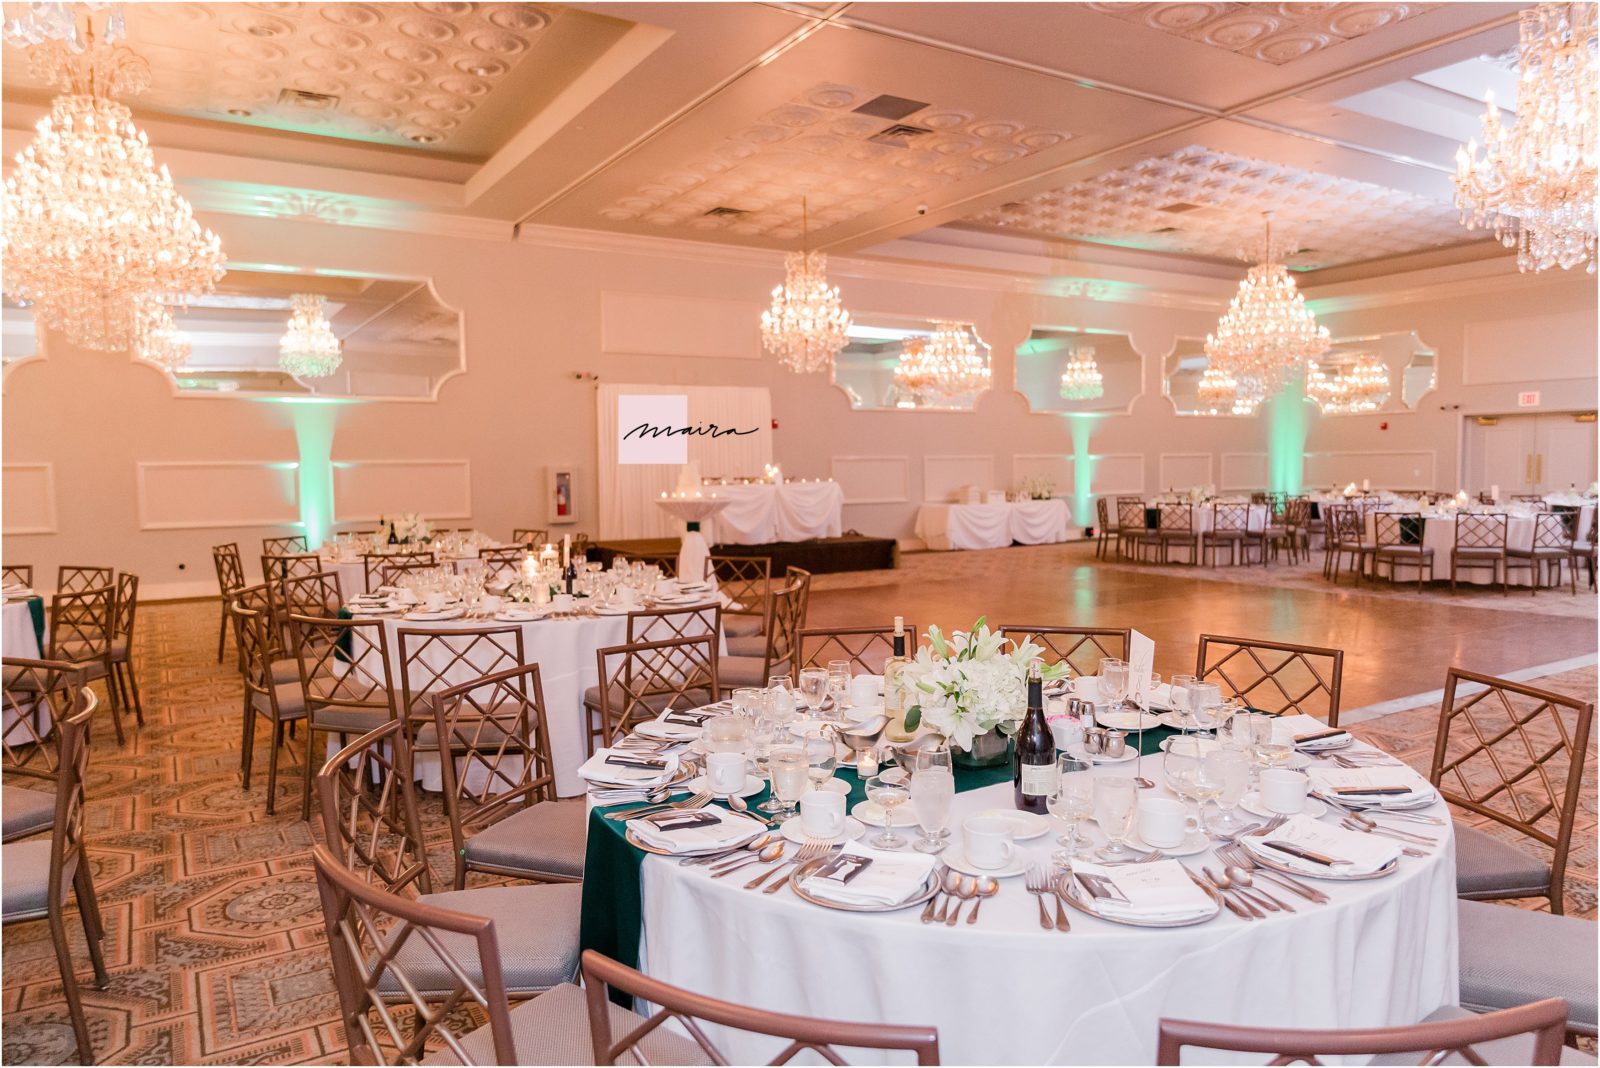 Oakbrook wedding in Drury Lane ,Venue, Reception Hall, Details of room and tables, decor 